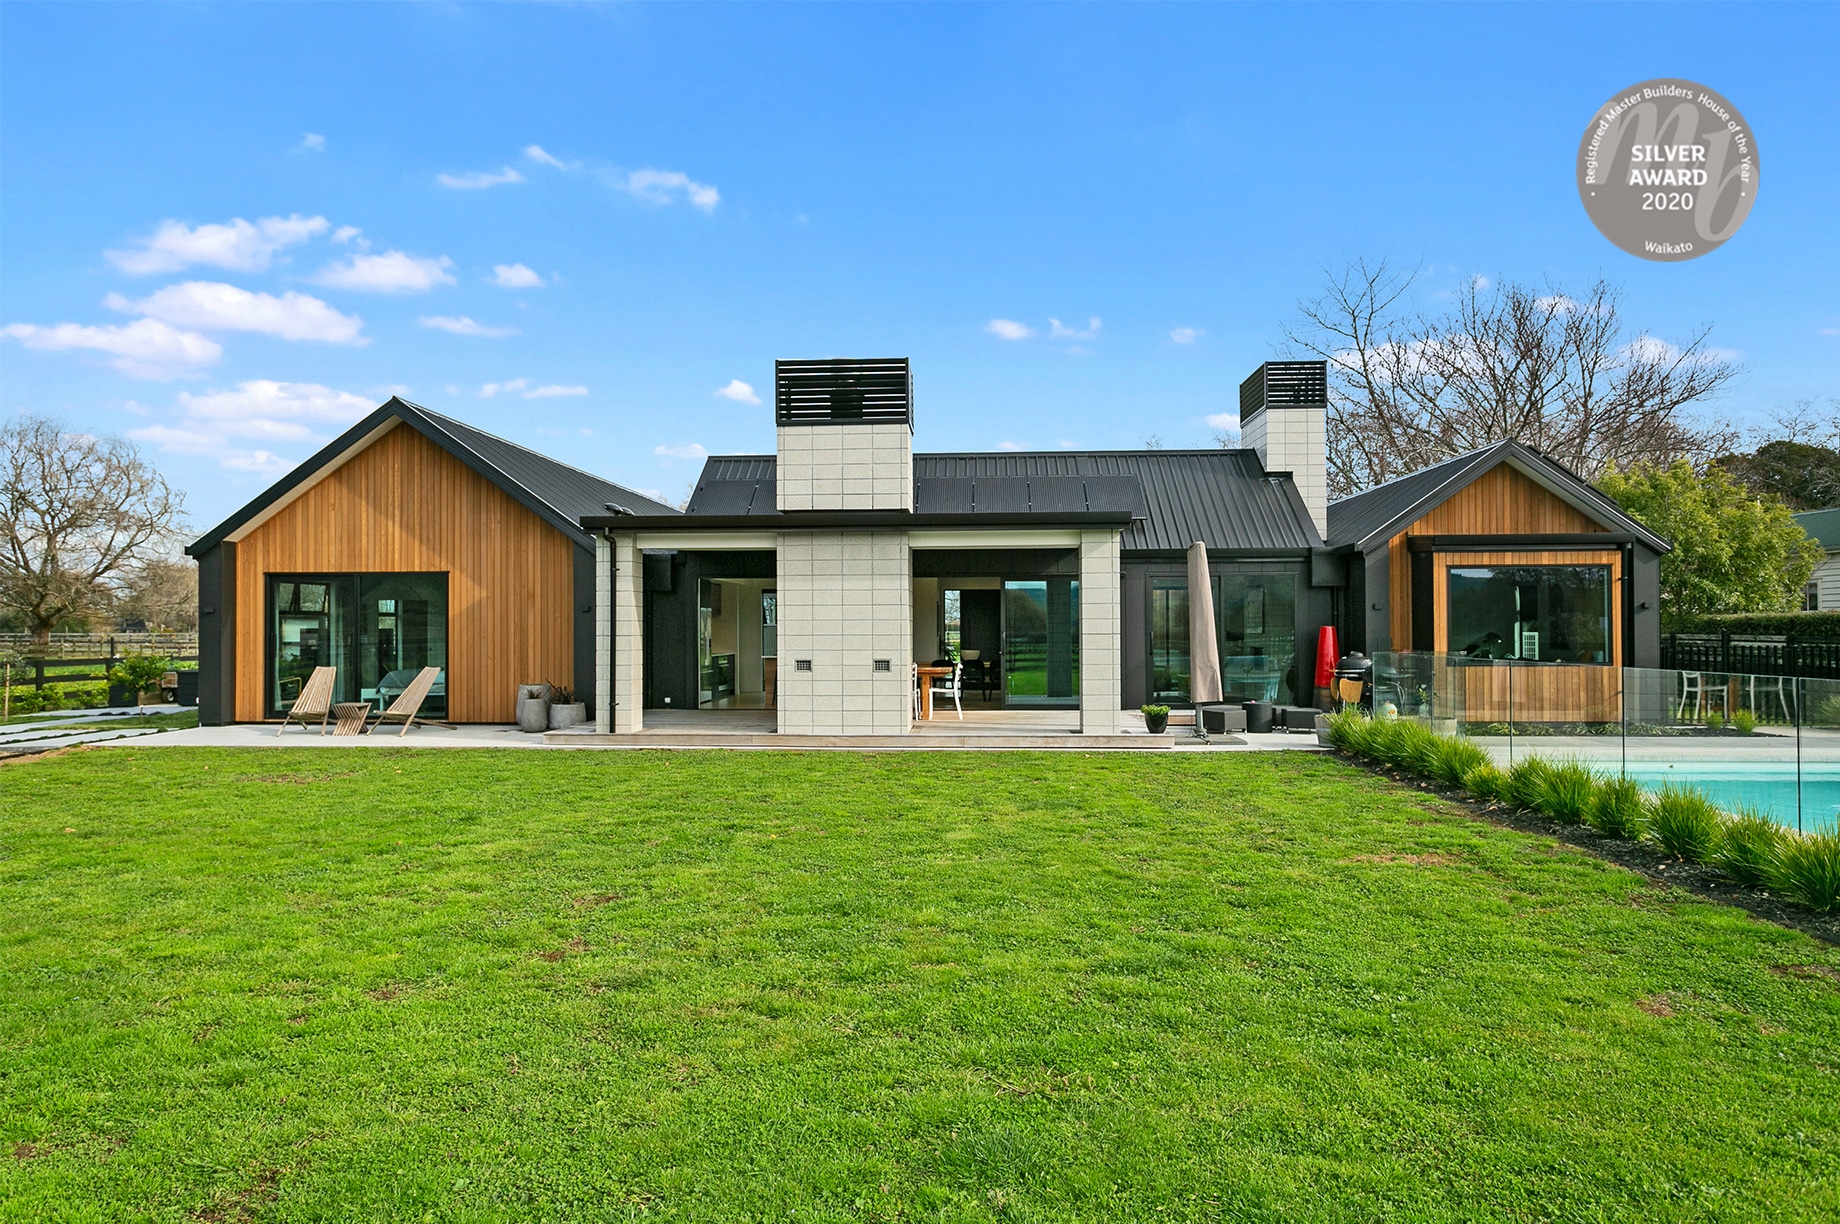 Award winning rural house with a pool exterior